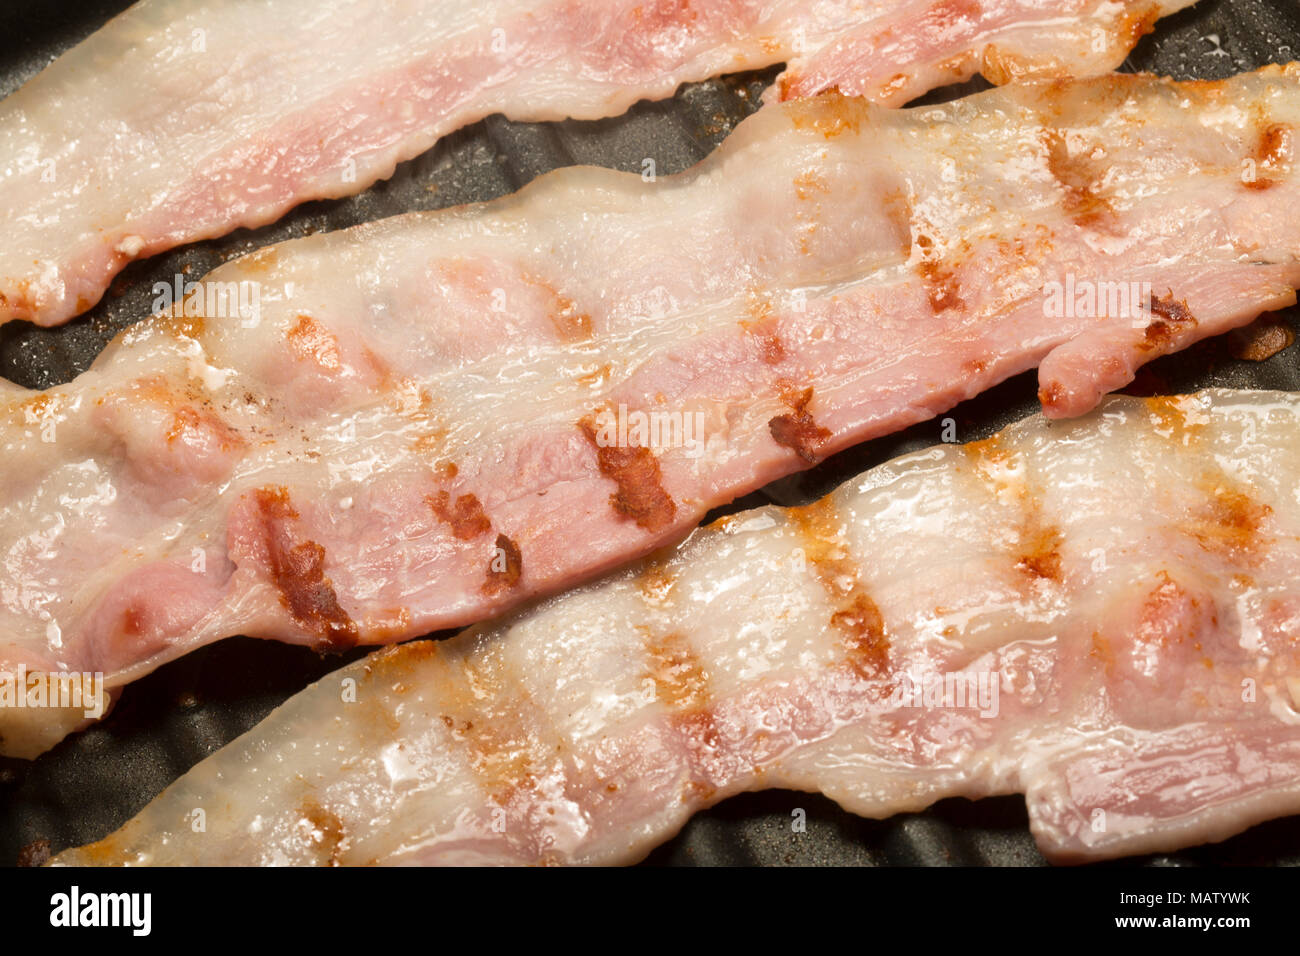 unsmoked EU bacon from a supermarket fried a George Foreman Reducing Grill using the natural fat of the bacon. UK Stock Photo - Alamy